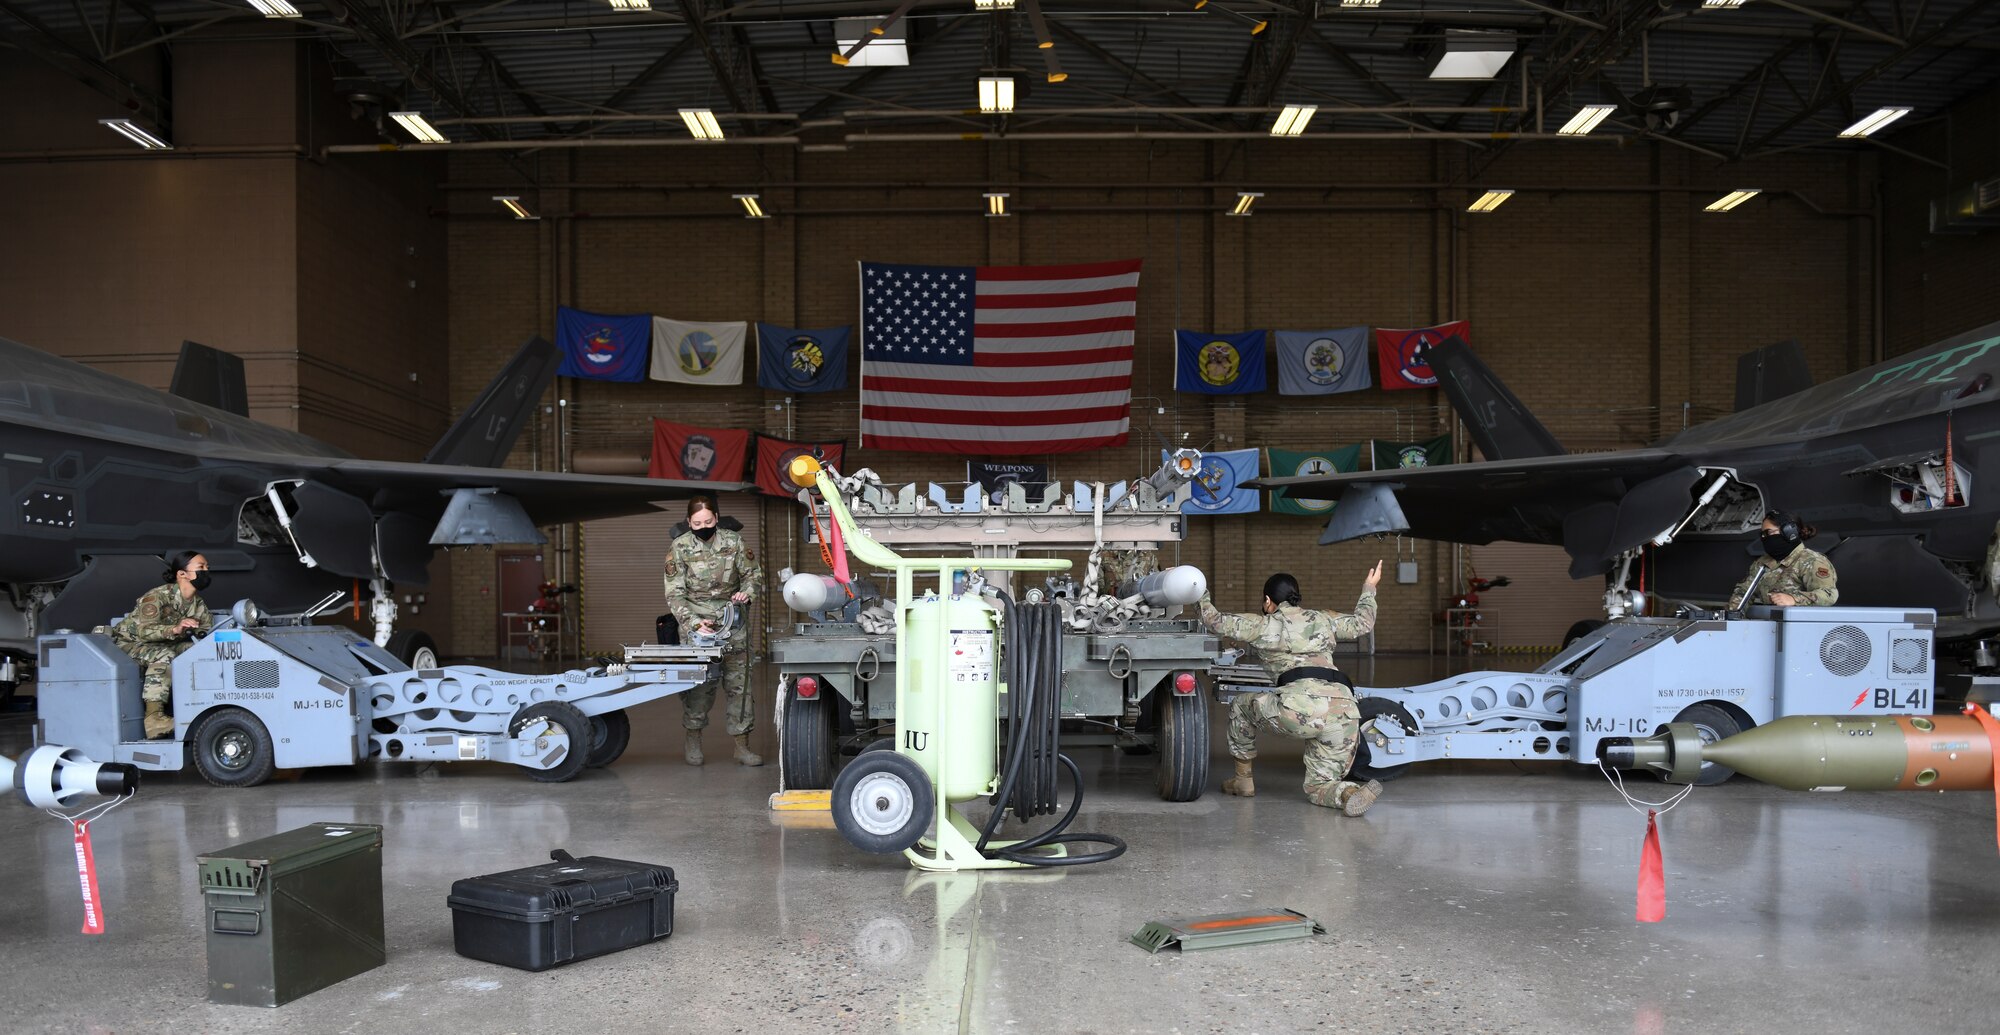 Airmen from multiple 56th Fighter Wing and 944th FW aircraft maintenance units participate in the Women of Weapons Exhibition Load March 25, 2021, at Luke Air Force Base, Arizona. The exhibition load involved three teams made up of women from different backgrounds, units and ranks loading weapons on the F-35A Lightning II and the F-16 Fighting Falcon. Diversity allows the Air Force to capitalize on all available talent by enabling a culture of inclusion. (U.S. Air Force photo by Staff Sgt. Amber Carter)